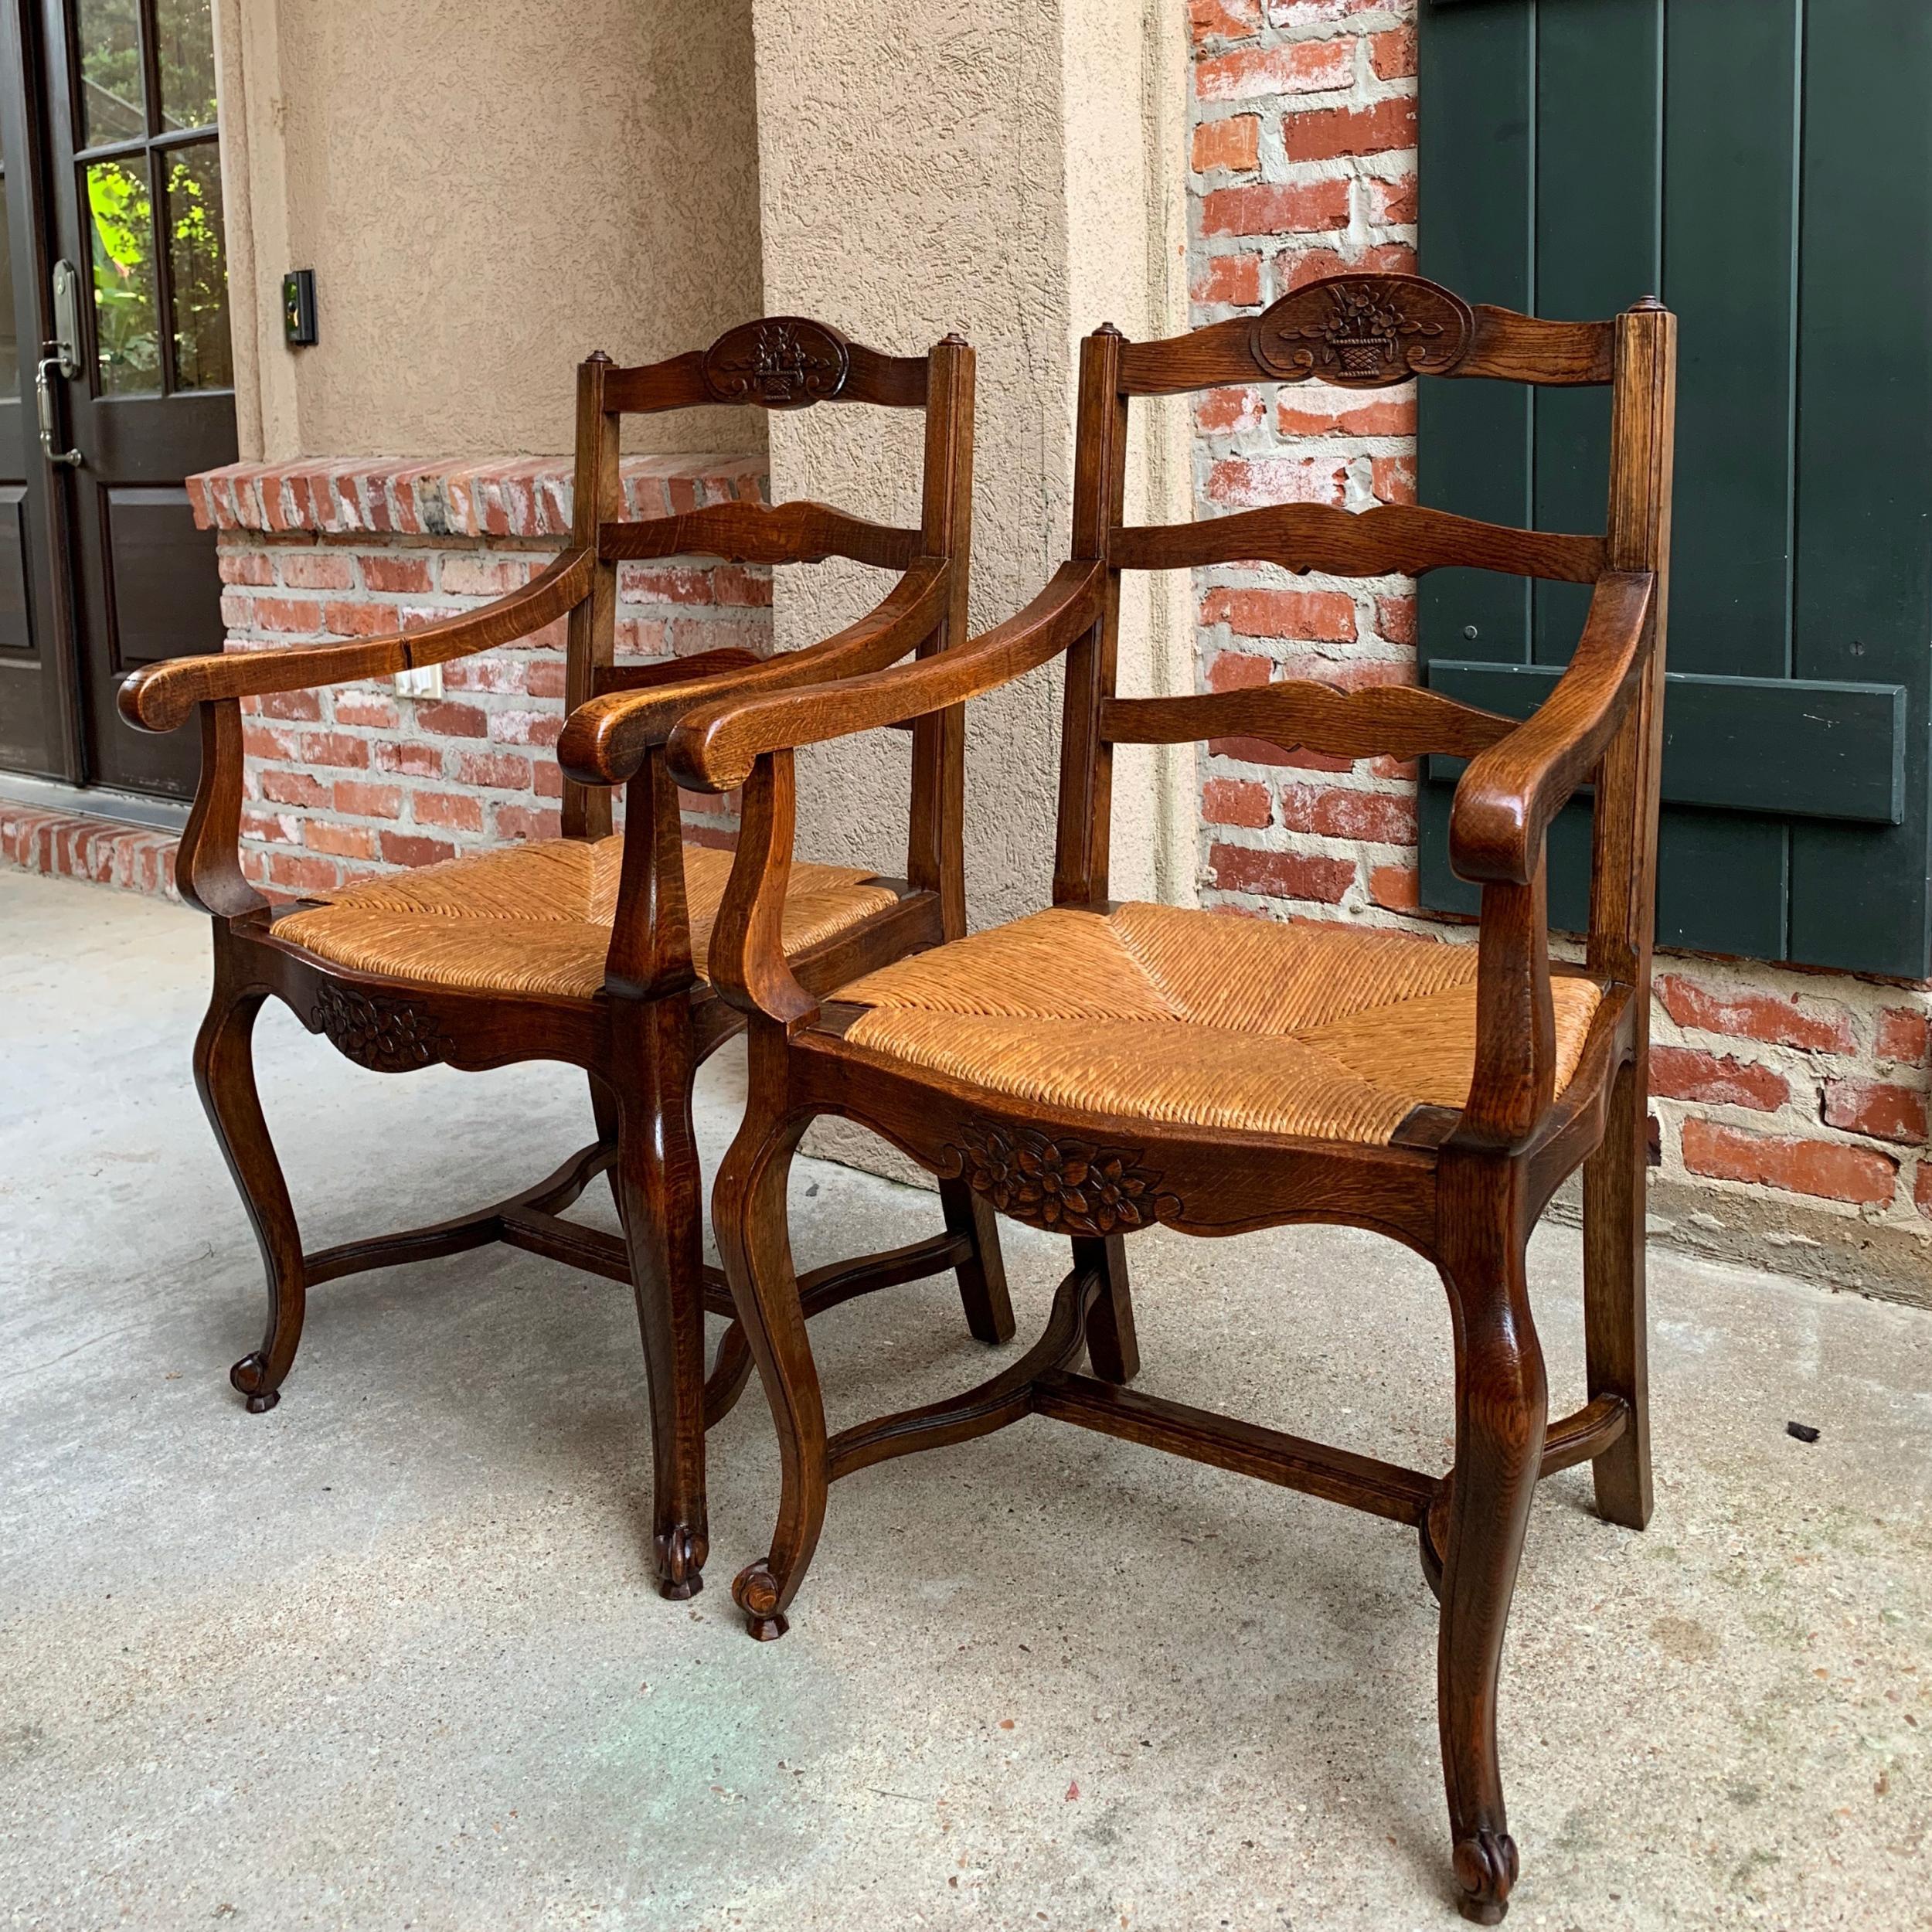 ~Lovely pair of antique French armchairs, with Classic French style… perfect for any sitting area, from den to family room, kitchen or dining room, timeless style that compliments any decor!~
~Serpentine ladder backs with a lovely silhouette; rail